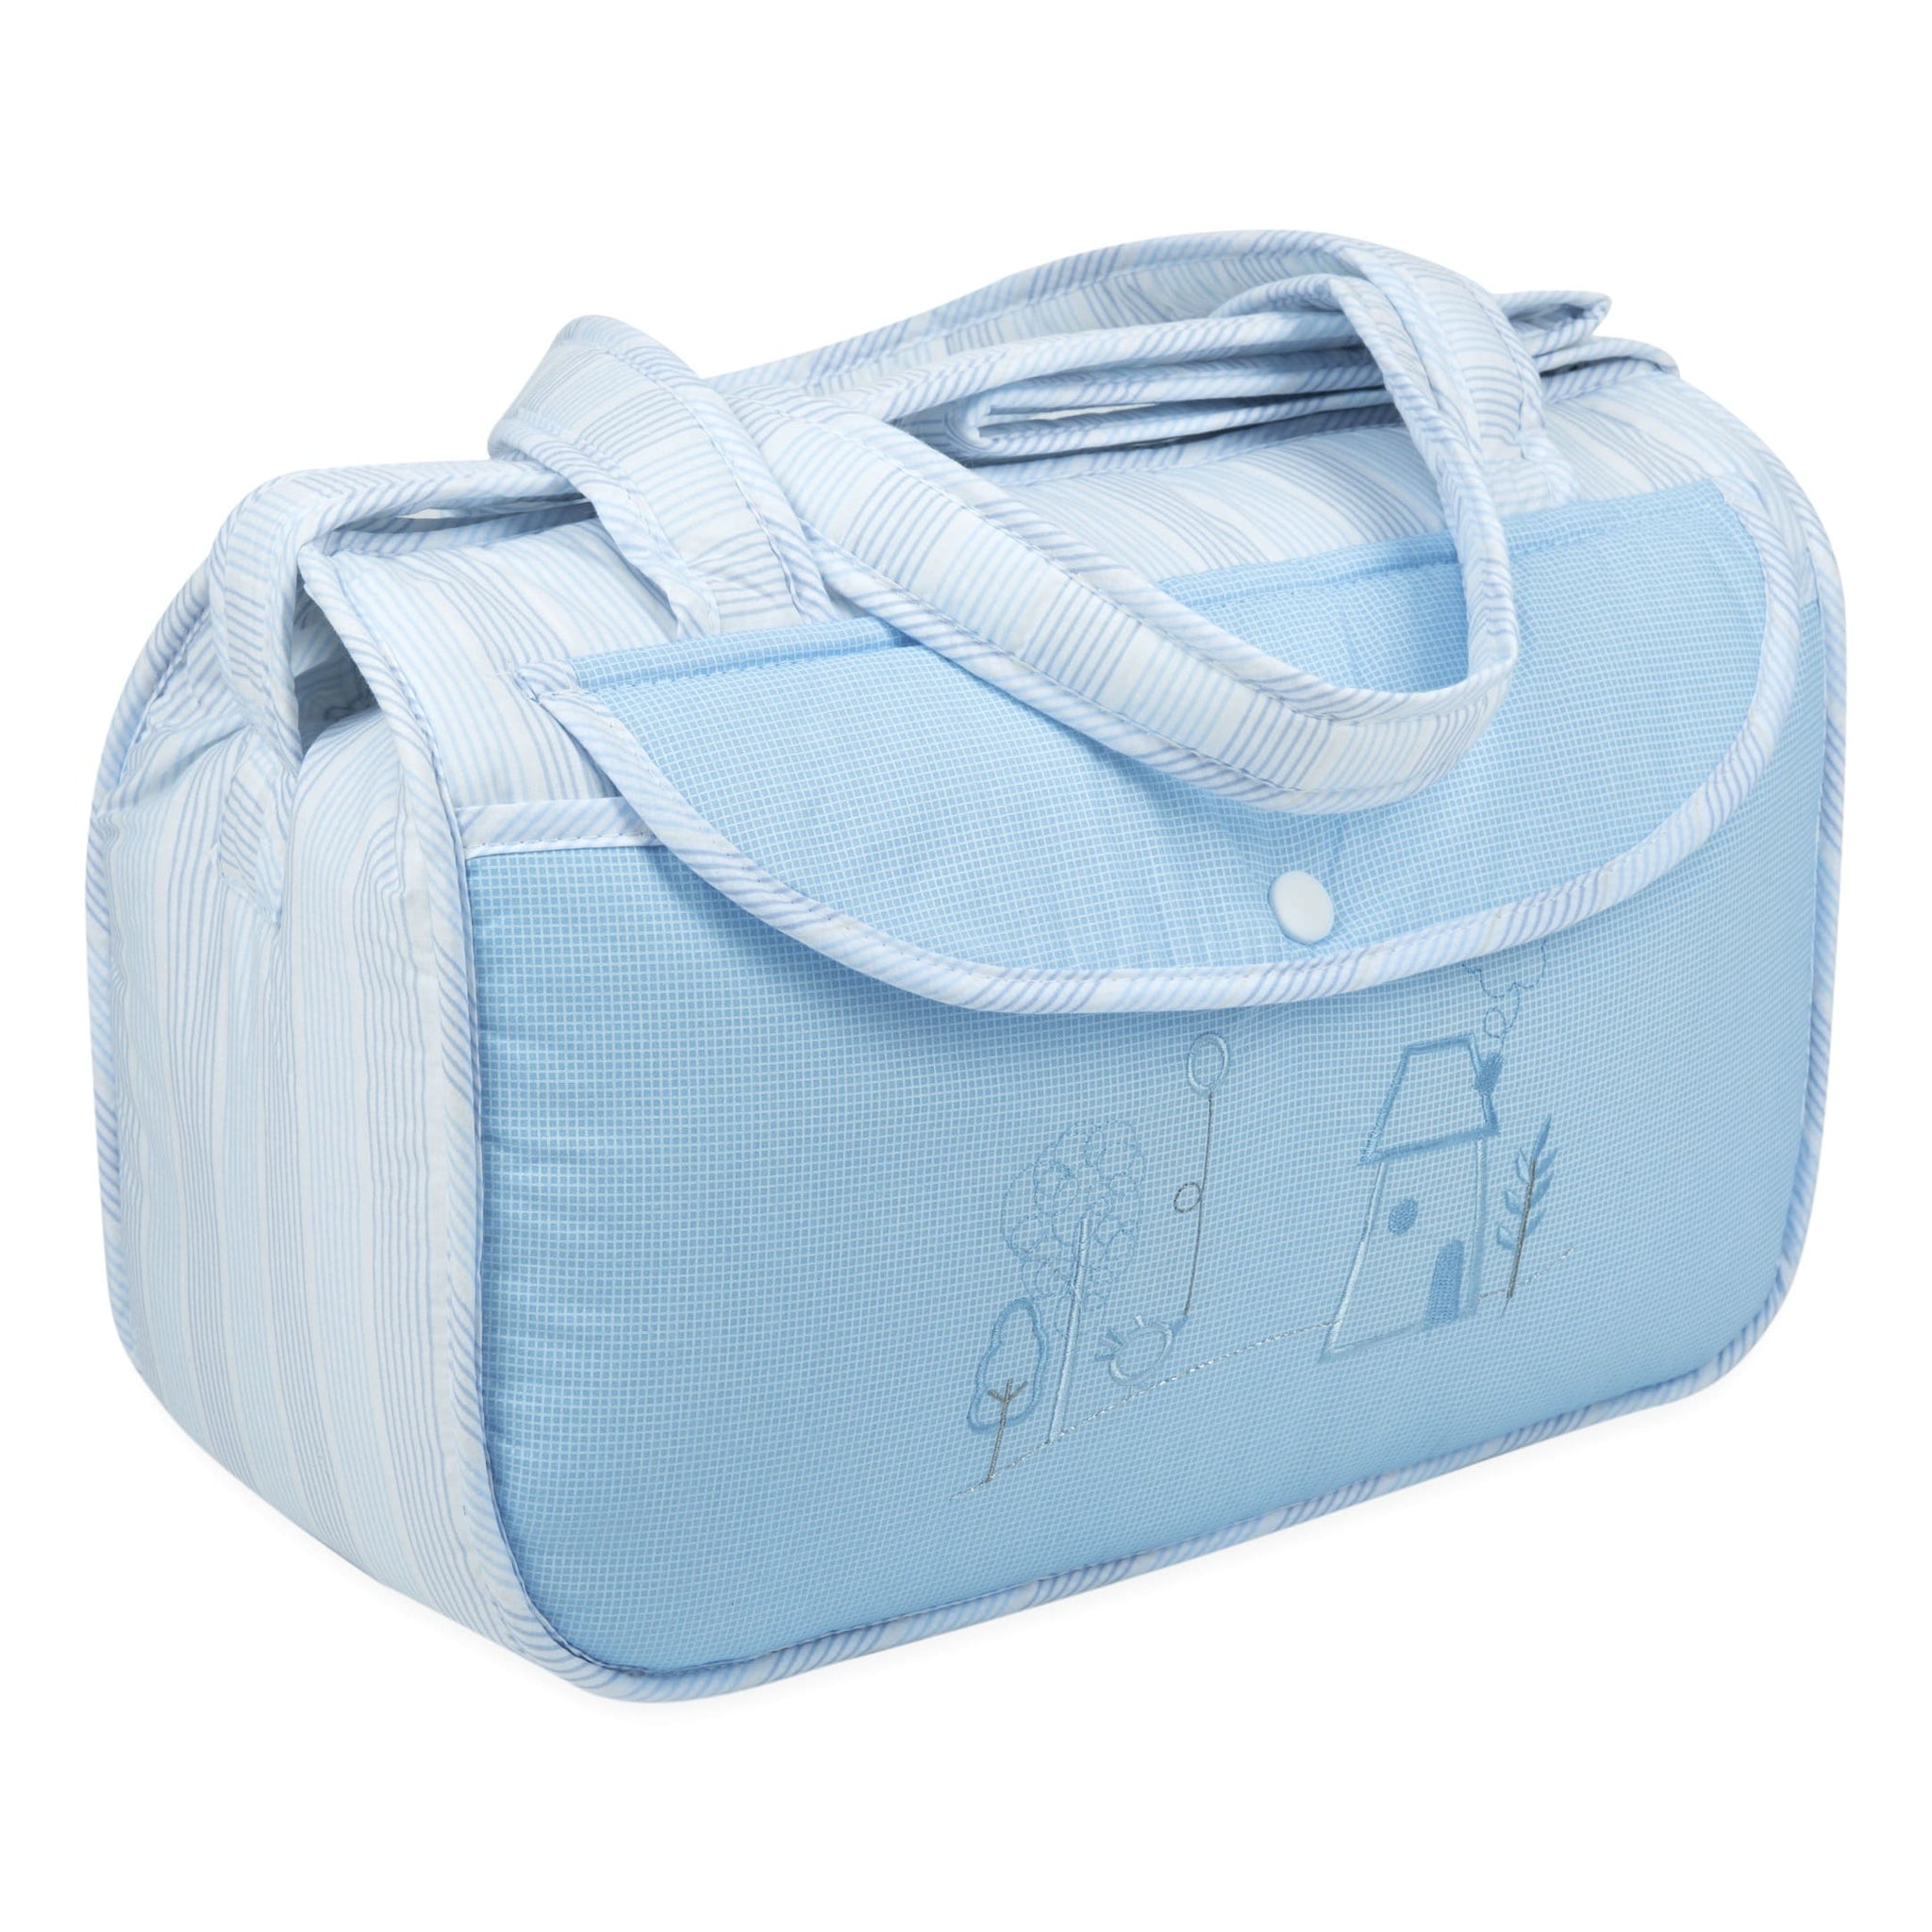 Little Angel Baby Nappy Tote Diaper Travel Bag - BLUE